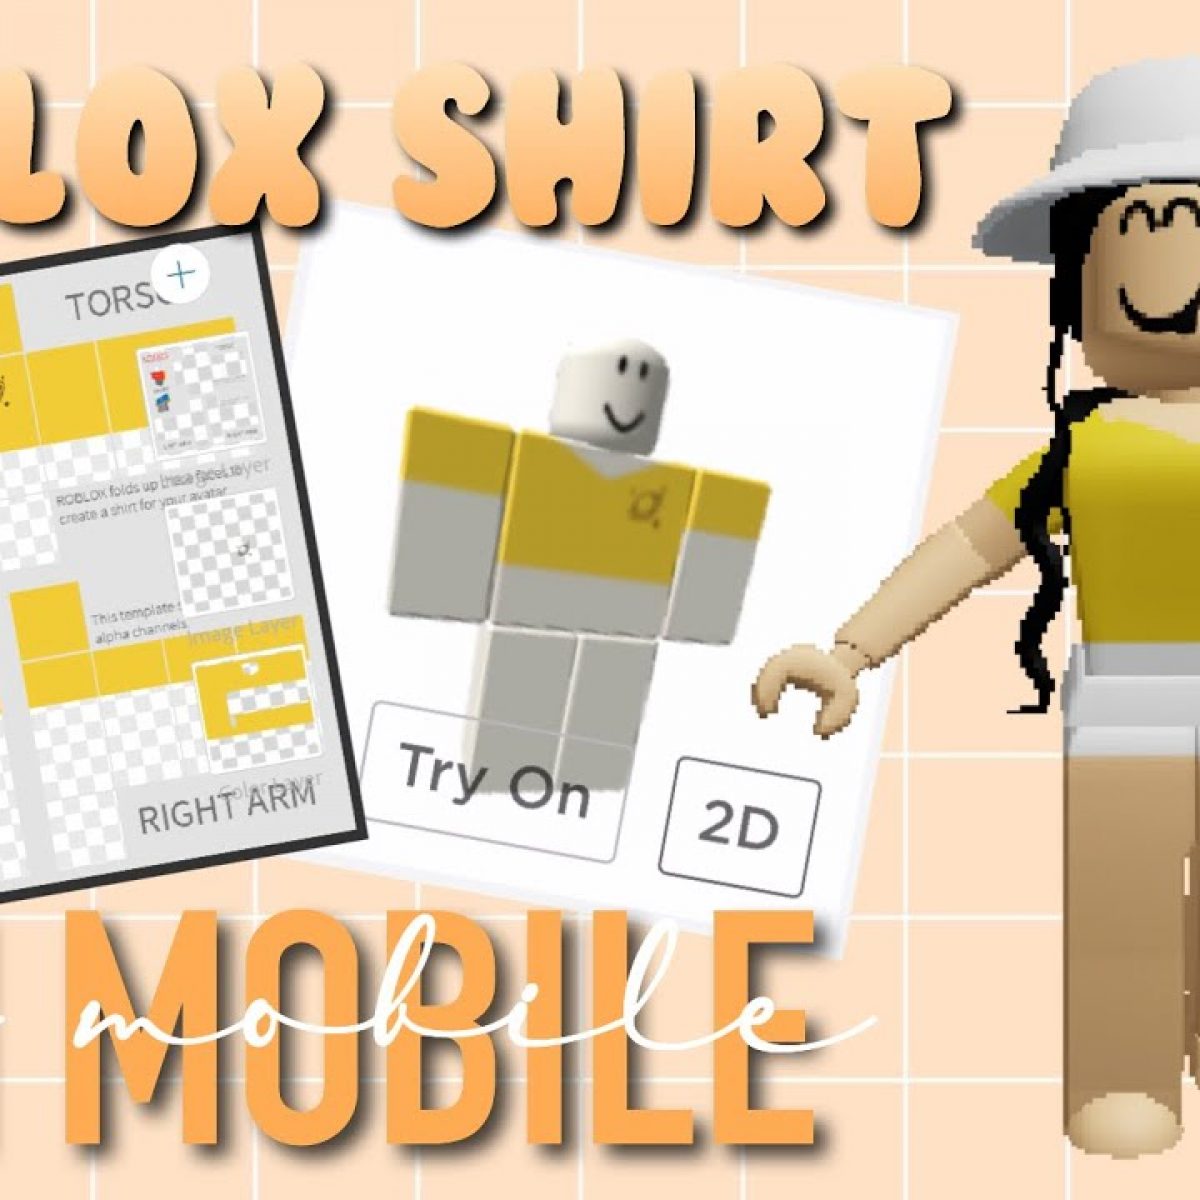 tension spell Munching How To Make A Roblox Shirt On Mobile | CellularNews